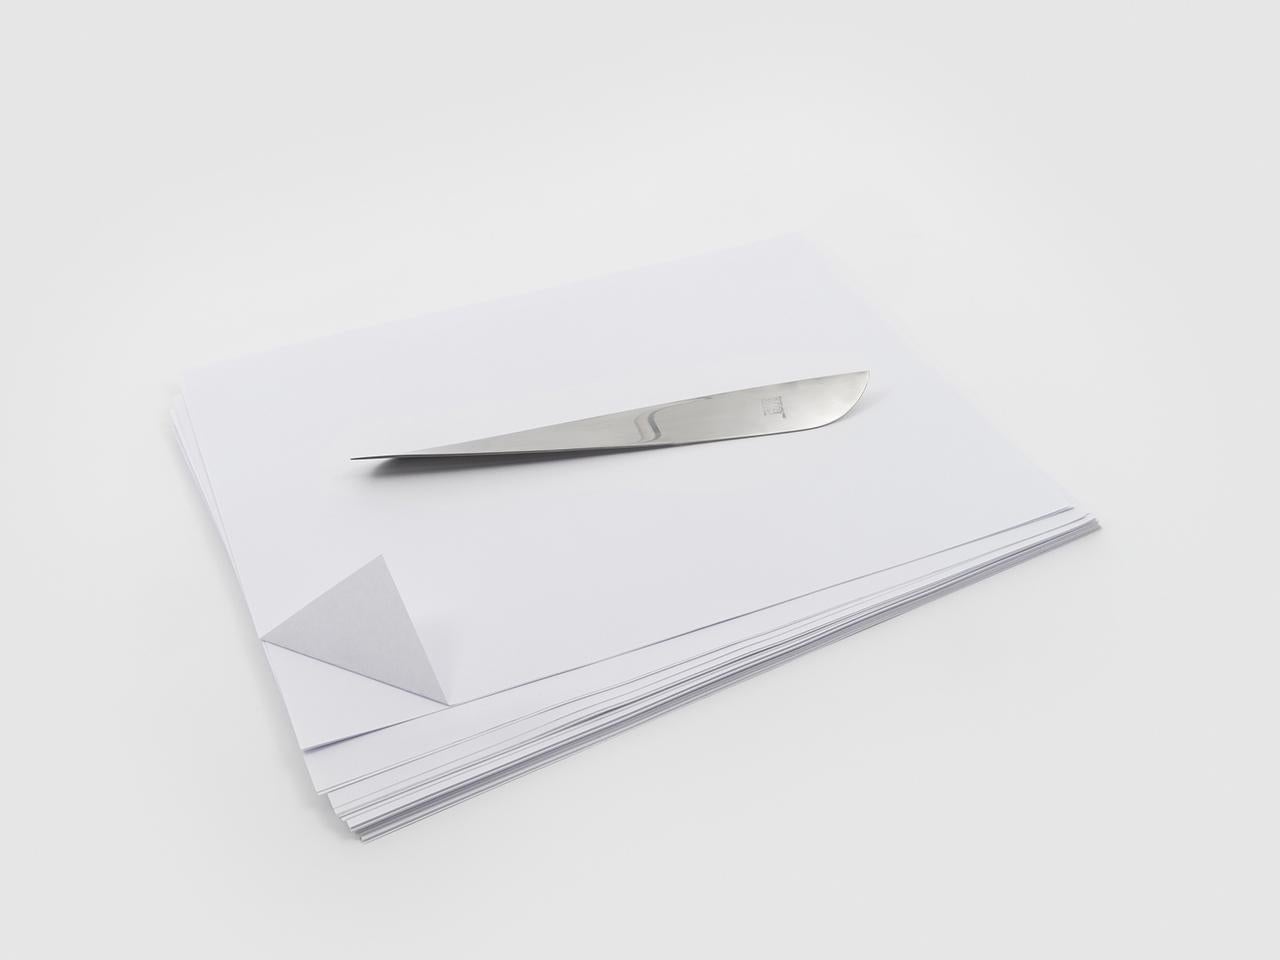 Ameland is a double-edged paper knife in satin finish stainless steel and is the result of an astute simplification of the manufacturing process. The piece is made unique by its dinstinctive, propeller-like curved shape and the lack of a